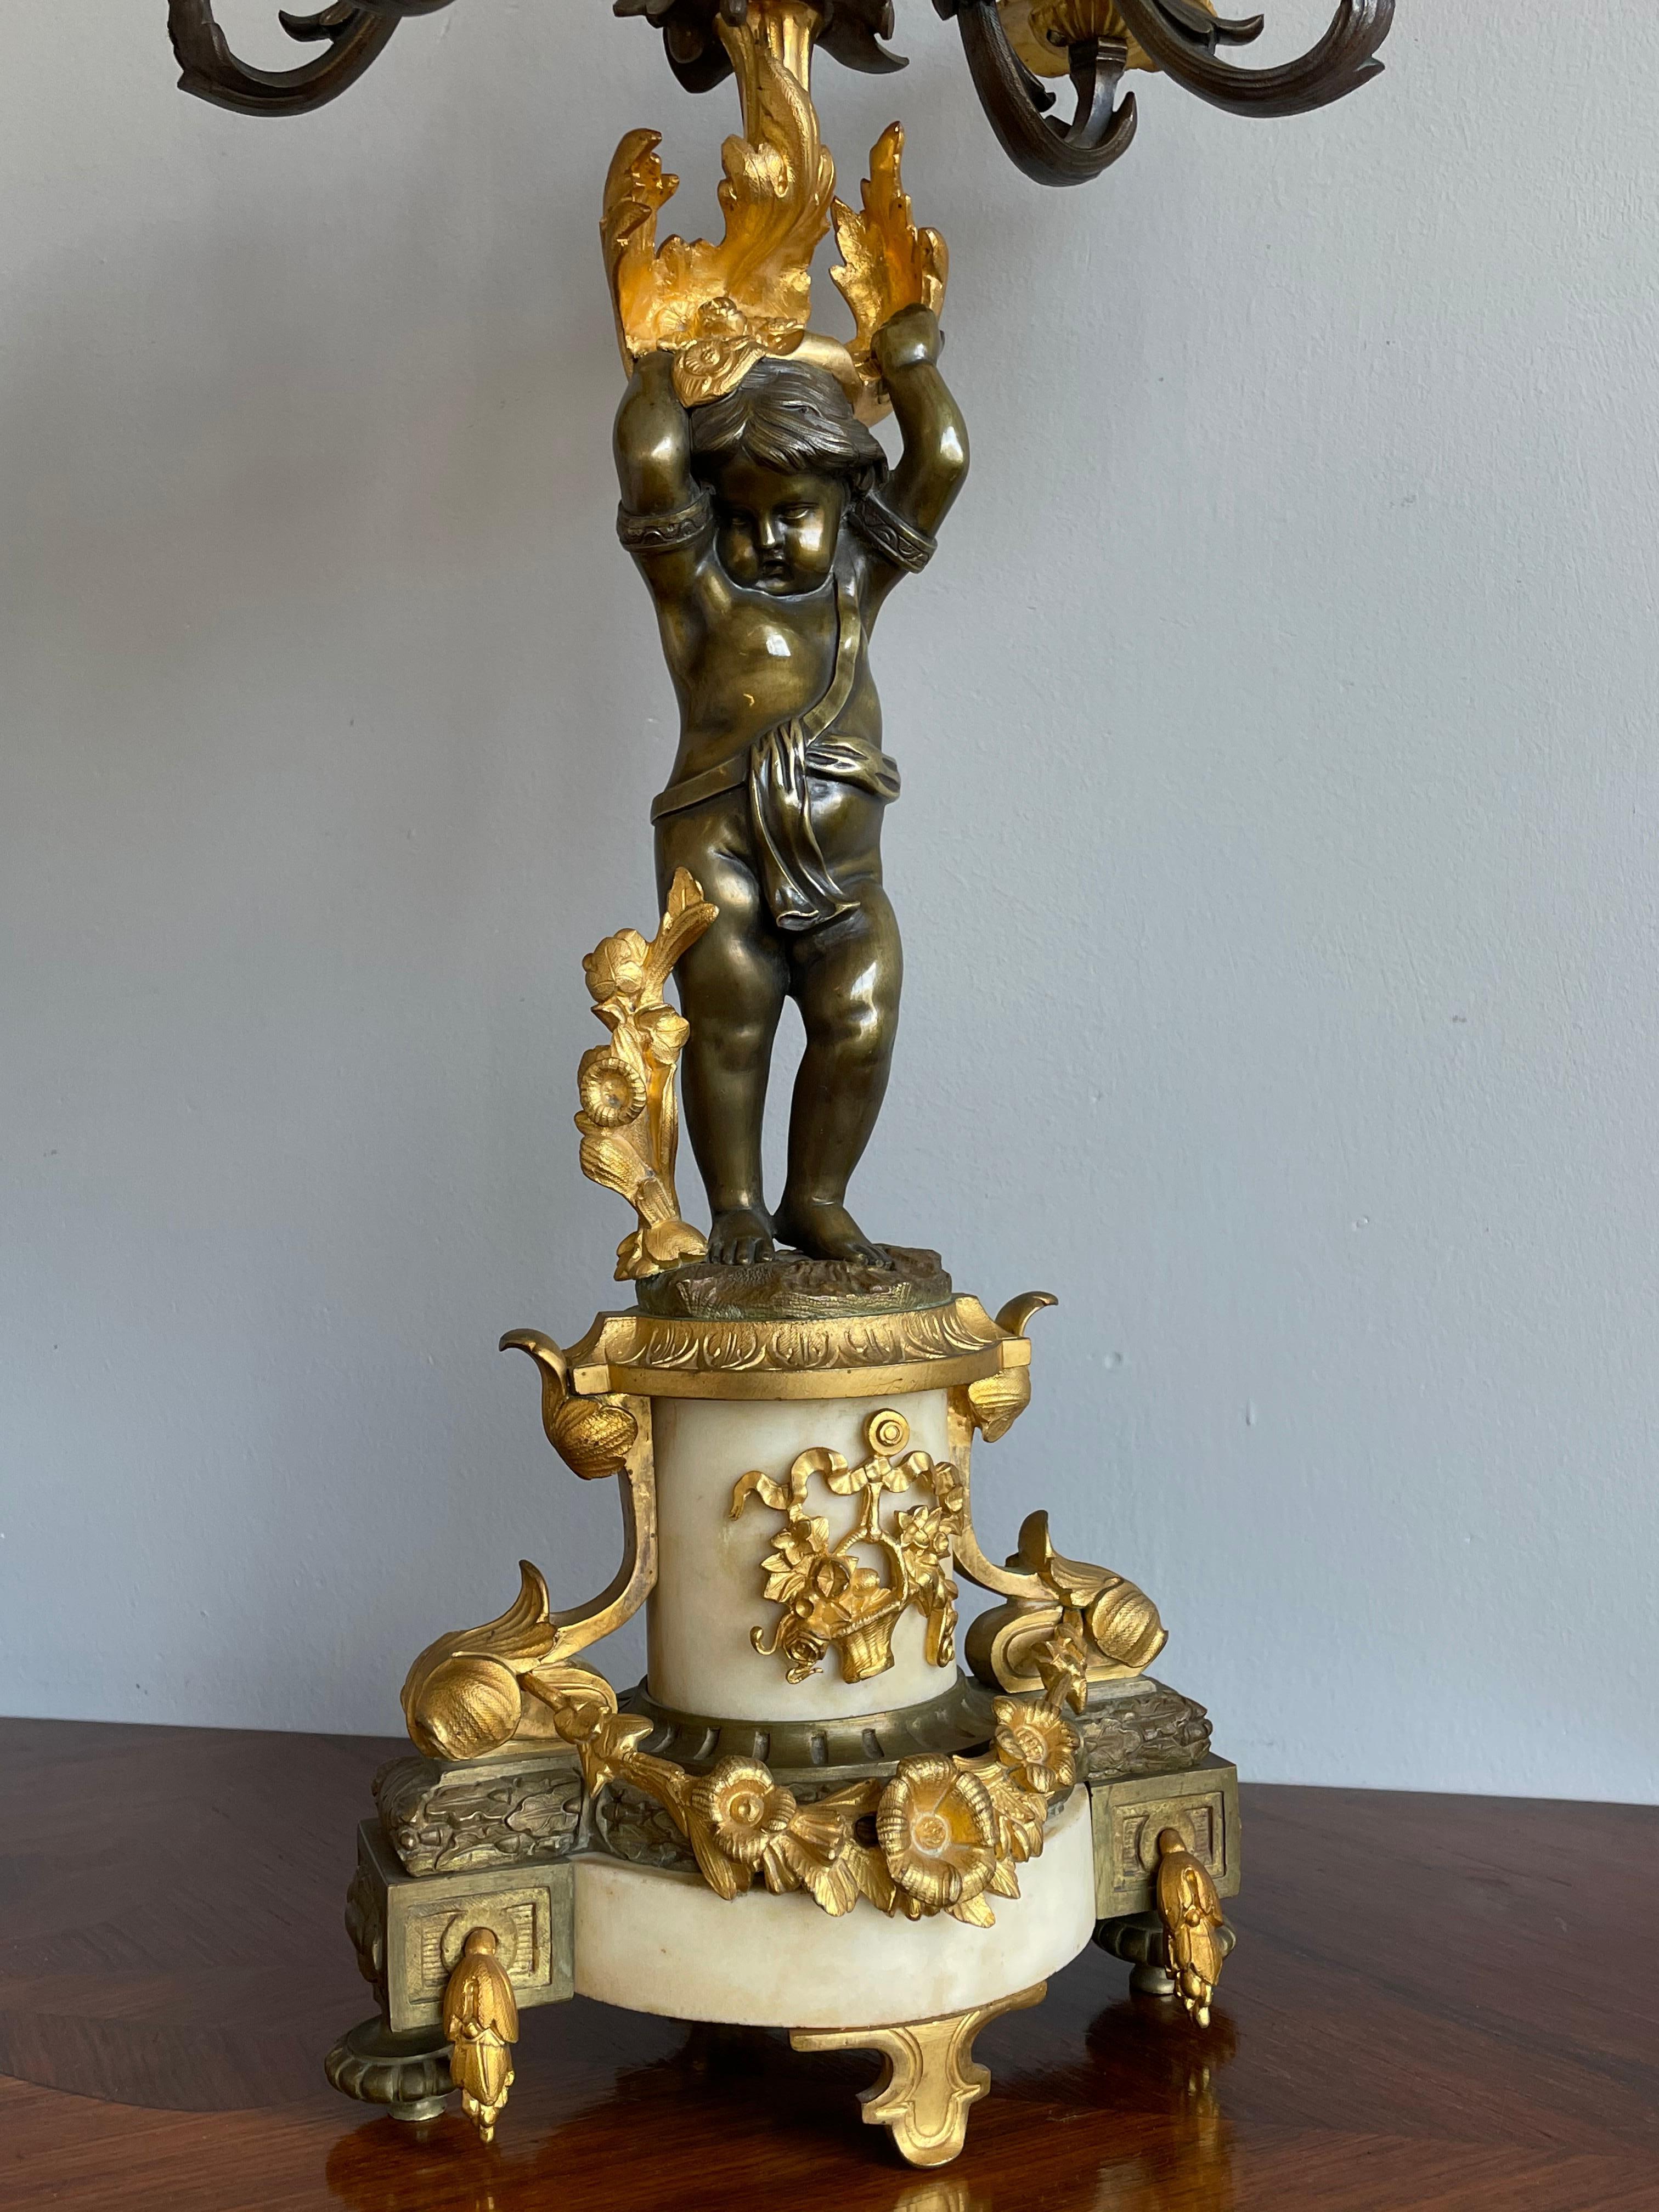 Top quality made and large pair of antique 6 candle candelabras with putto sculptures.

In mid 19th century Europe, the most beautiful candelabras and chandeliers were created and manufactured by the famous designers and makers in France. This